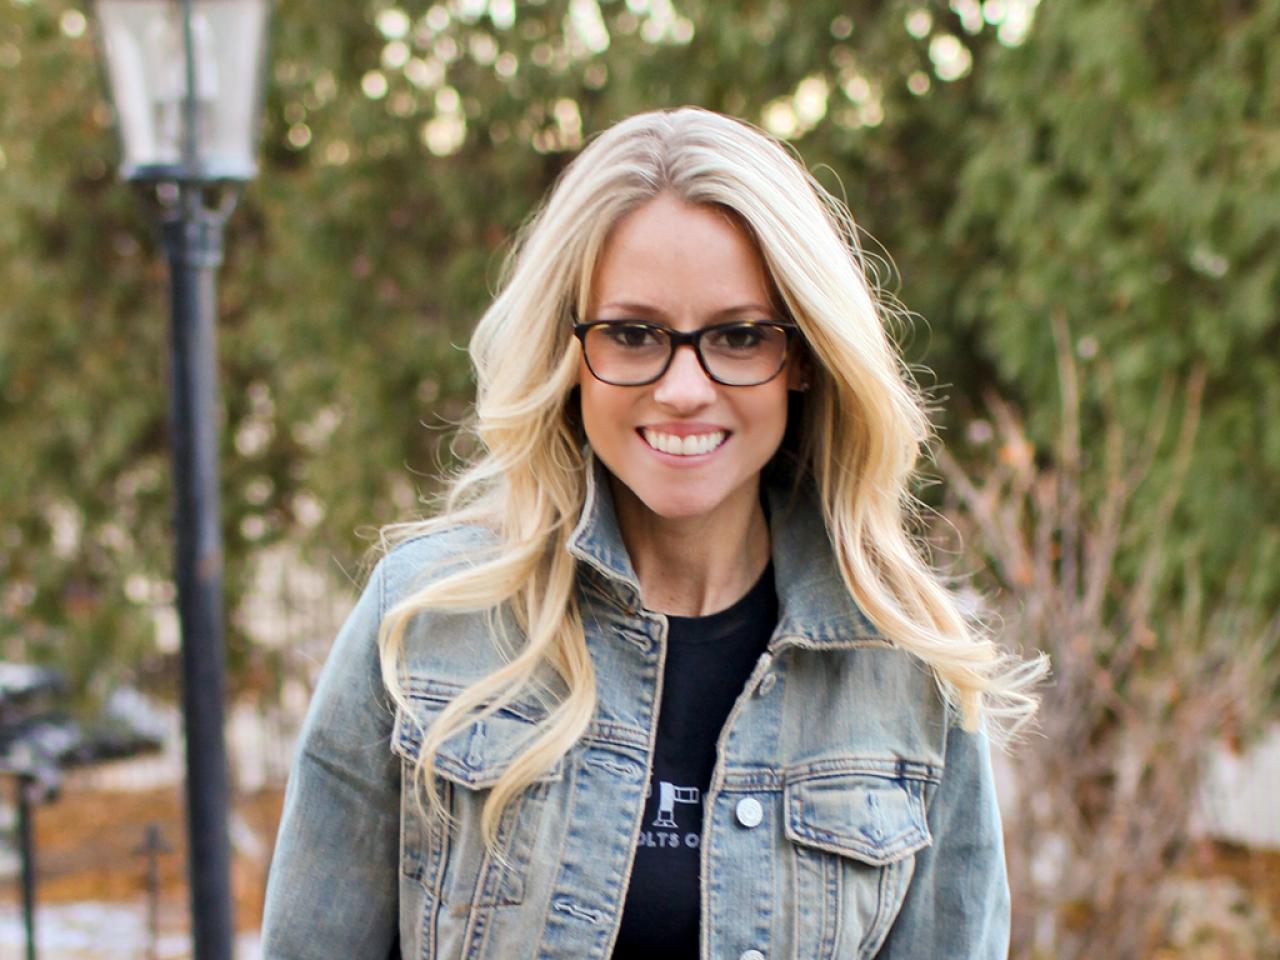 Nicole Curtis stands outside and smiles in a denim jacket.